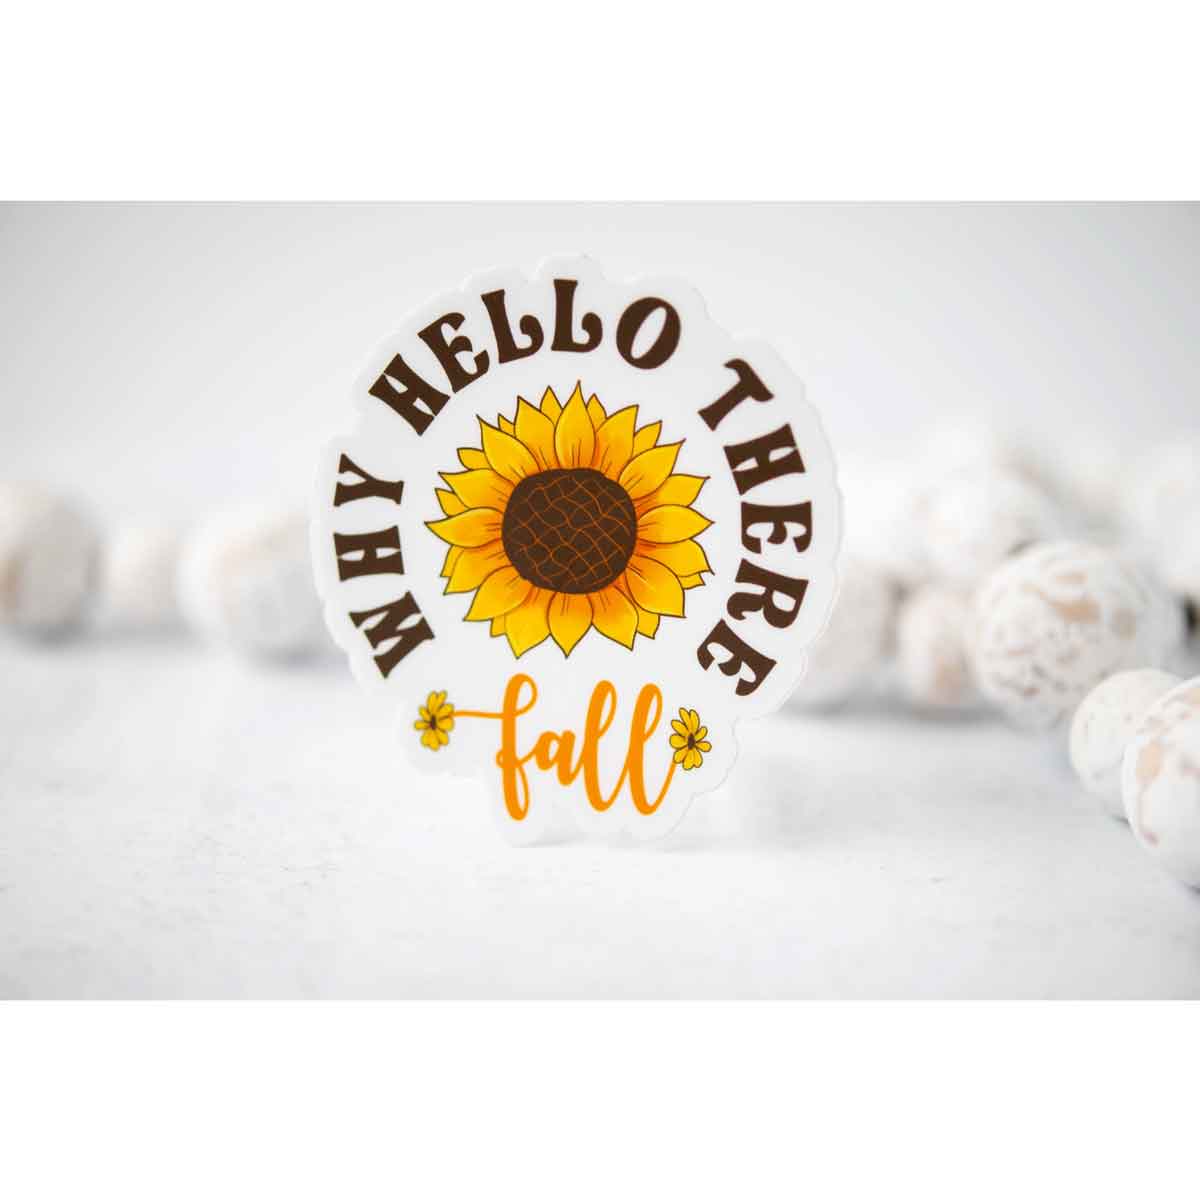 3 x 3" lettering "Why hello there fall" with sunflower